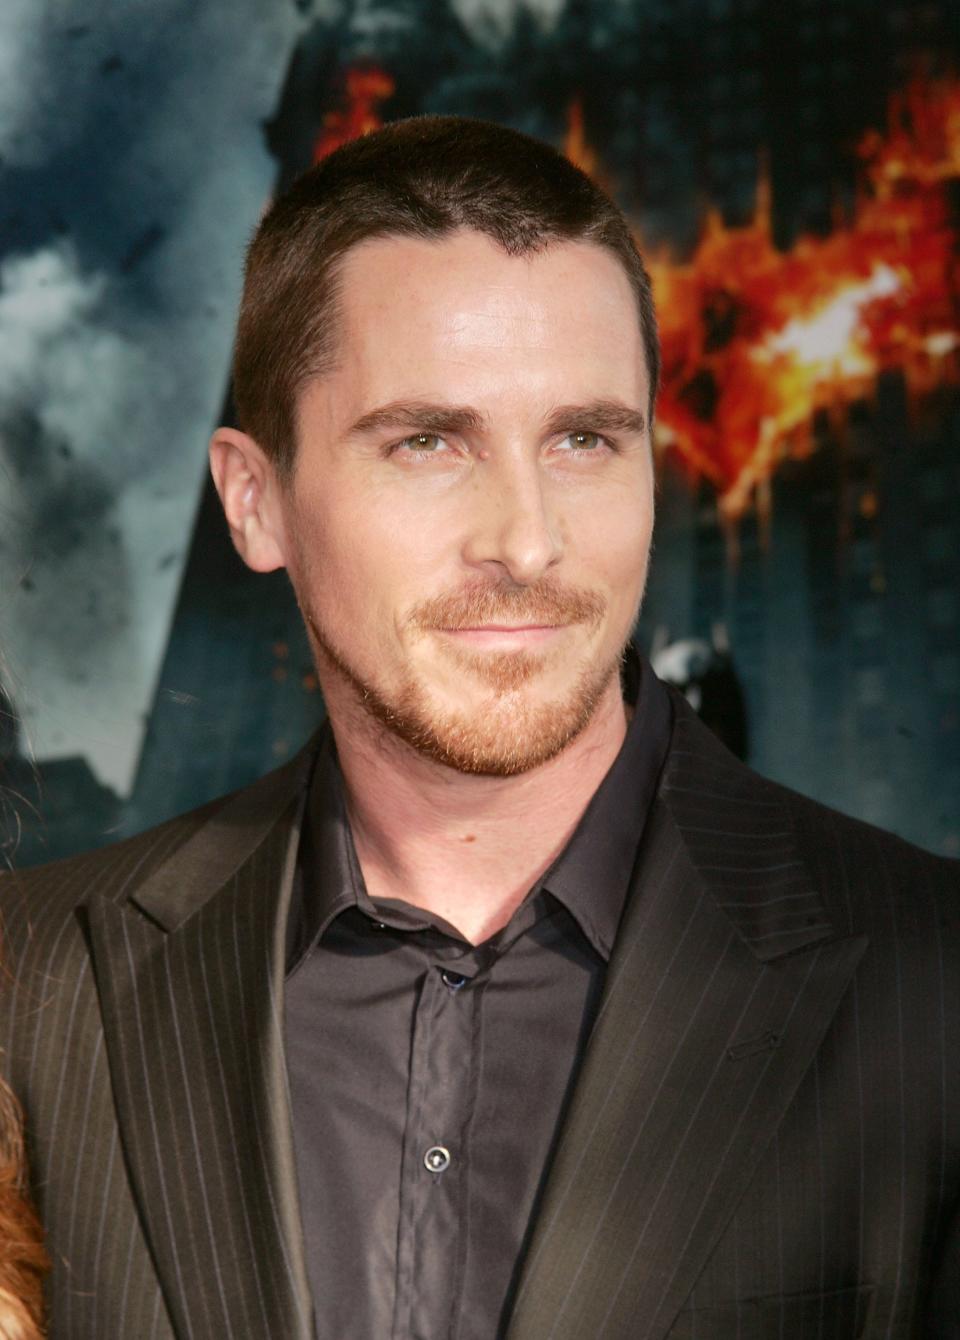 Christian Bale in a black suit